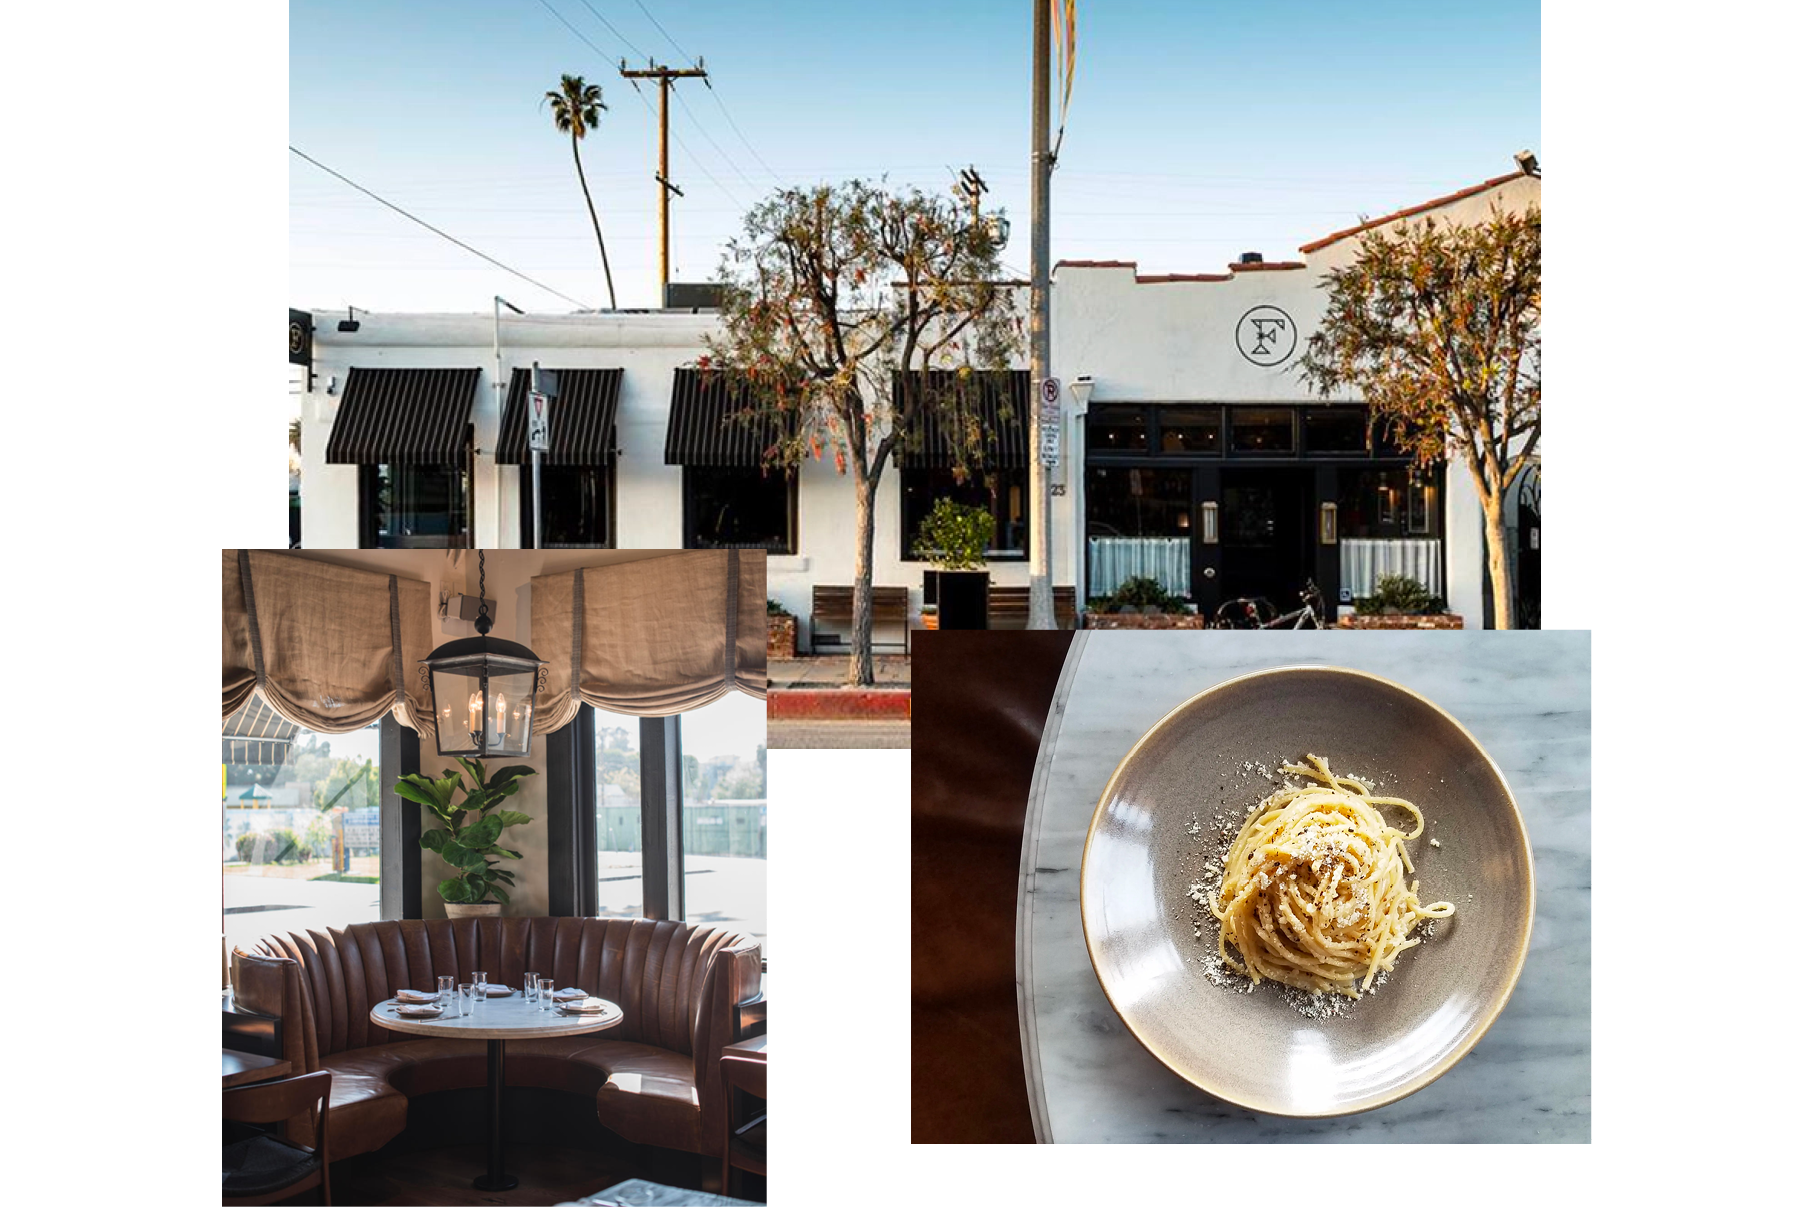 3 images of Felix LA restaurant ( Front view of website, pasta dish & table and chairs inside of restaurant)